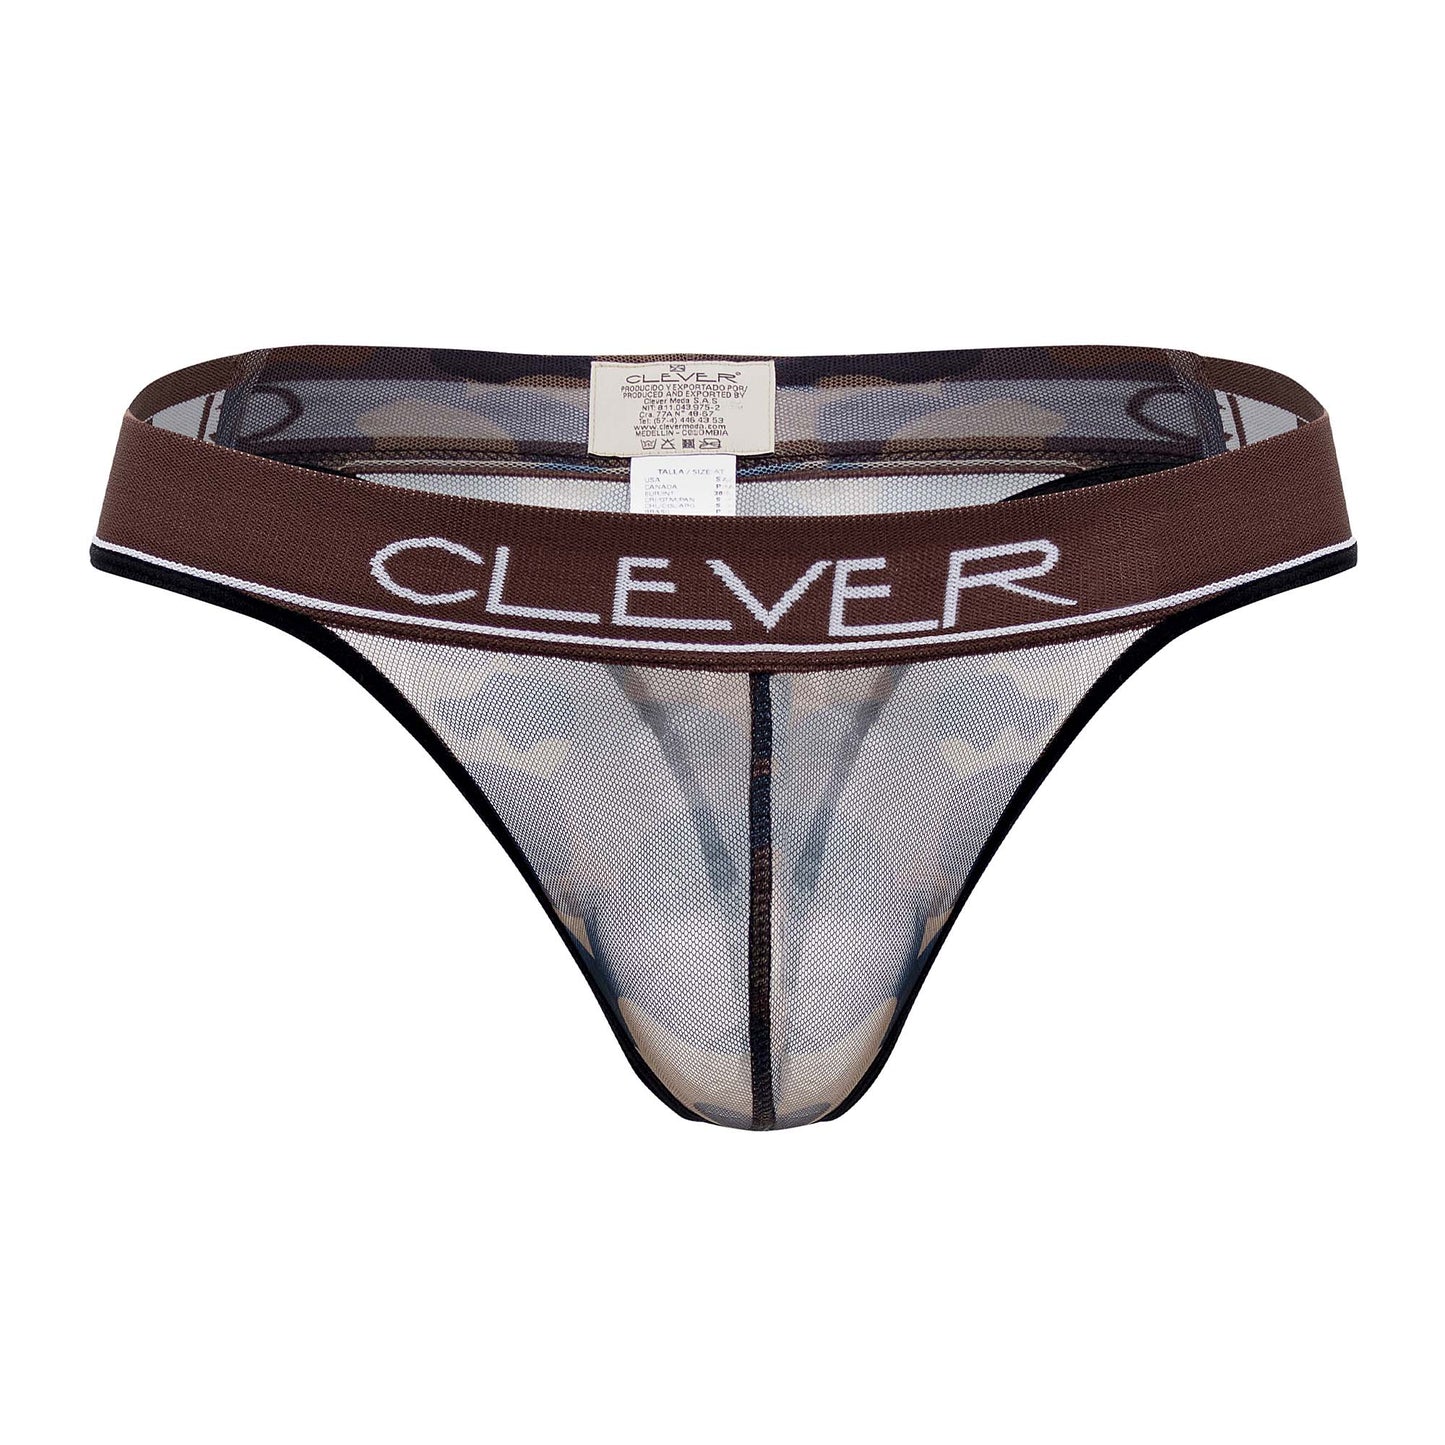 Clever 0919 Nation Star Thongs